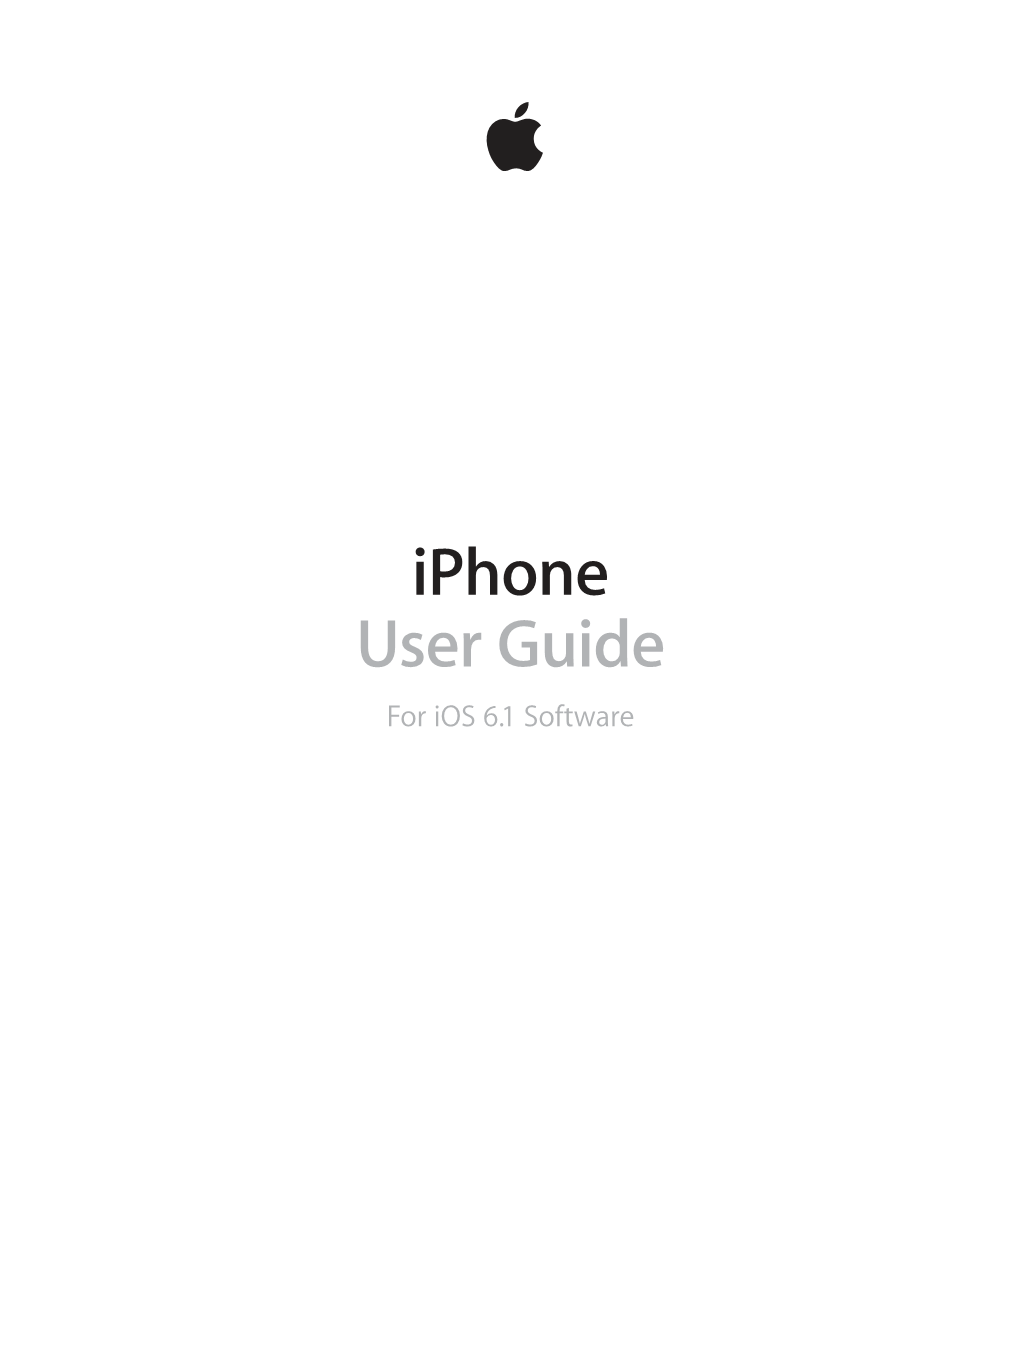 Iphone User Guide for Ios 6.1 Software Contents